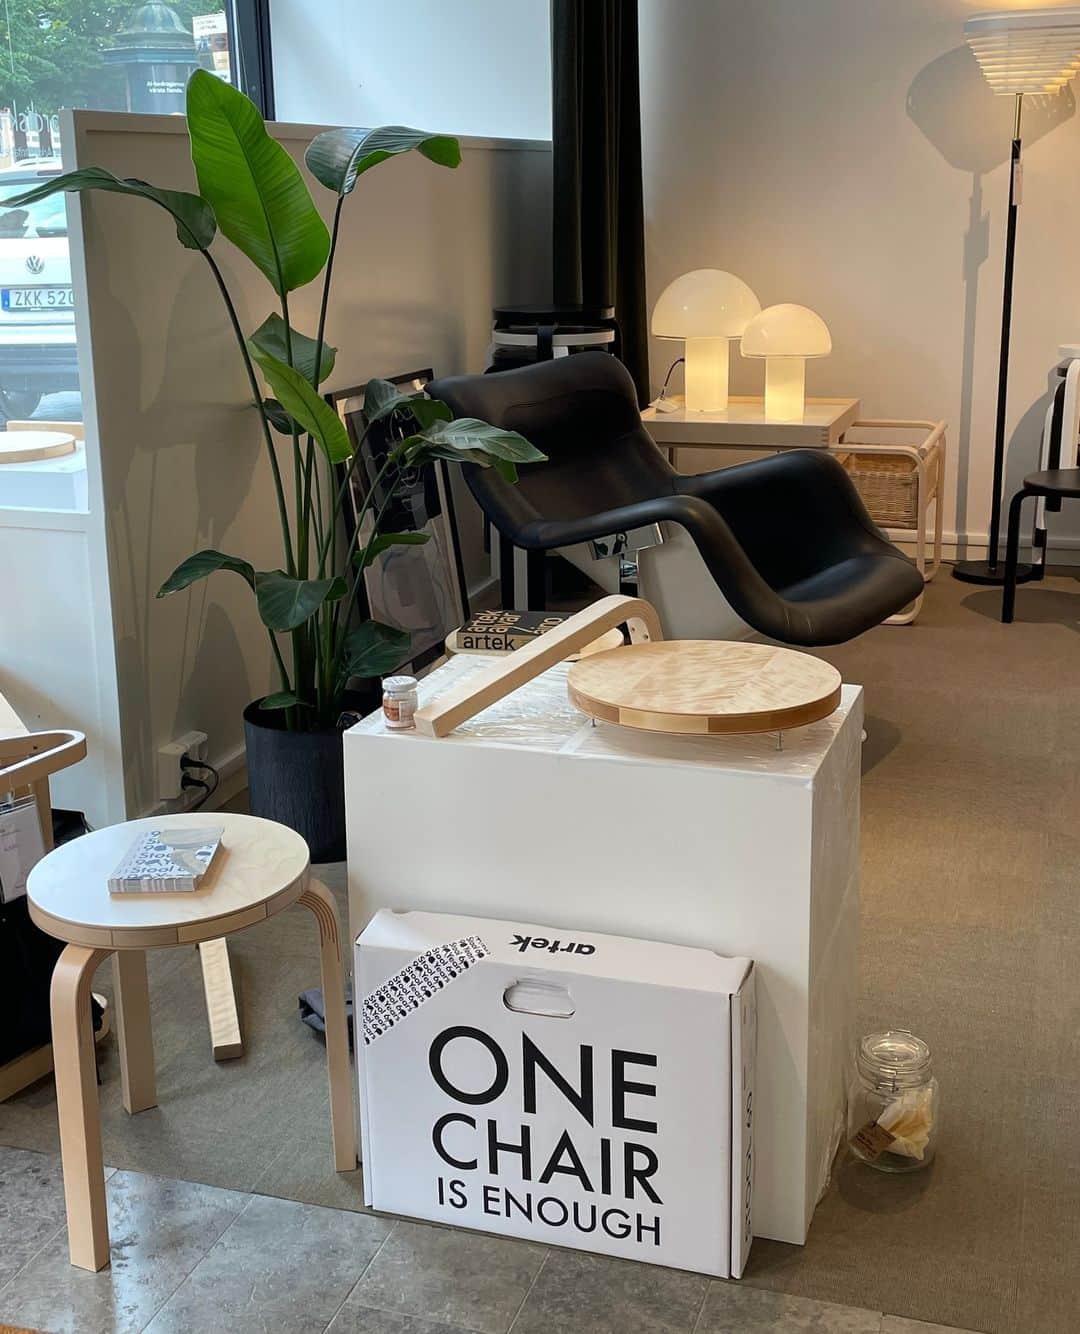 Artekのインスタグラム：「Stool 60 Loimu at @nordiskmobelkonst ✨  Thank you for sharing the images of your wonderful Stool 60 display.   Opening times:  Tuesday- Friday 11:00-18:00 Saturday 11:00-14:00  Address:  Östra Storgatan 37 553 21 Jönköping  If you are in Jönköping, swing by to check it out!」